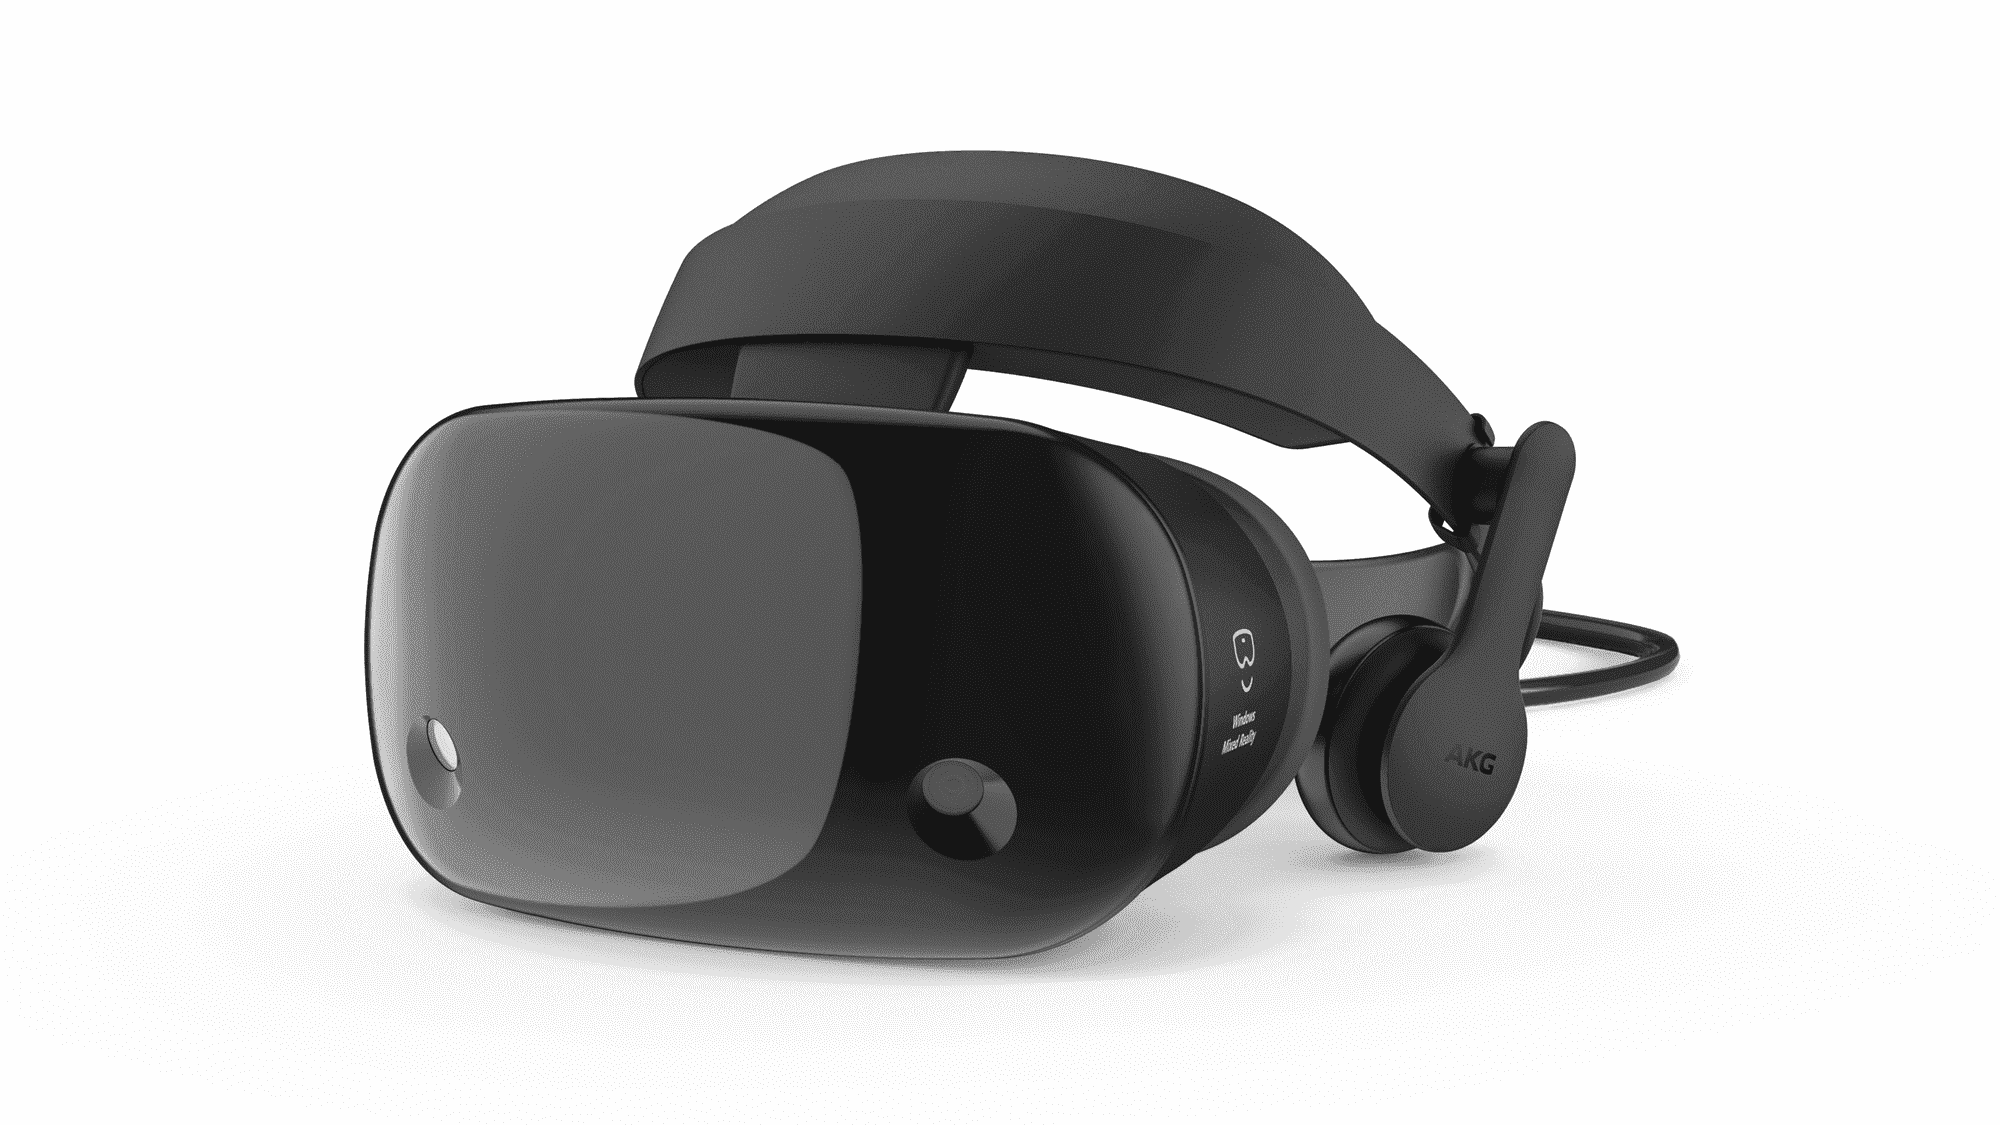 Samsung HMD Odyssey+ Windows Mixed Reality headset spotted online 7156447f3345dd485980f955474ac73e.png